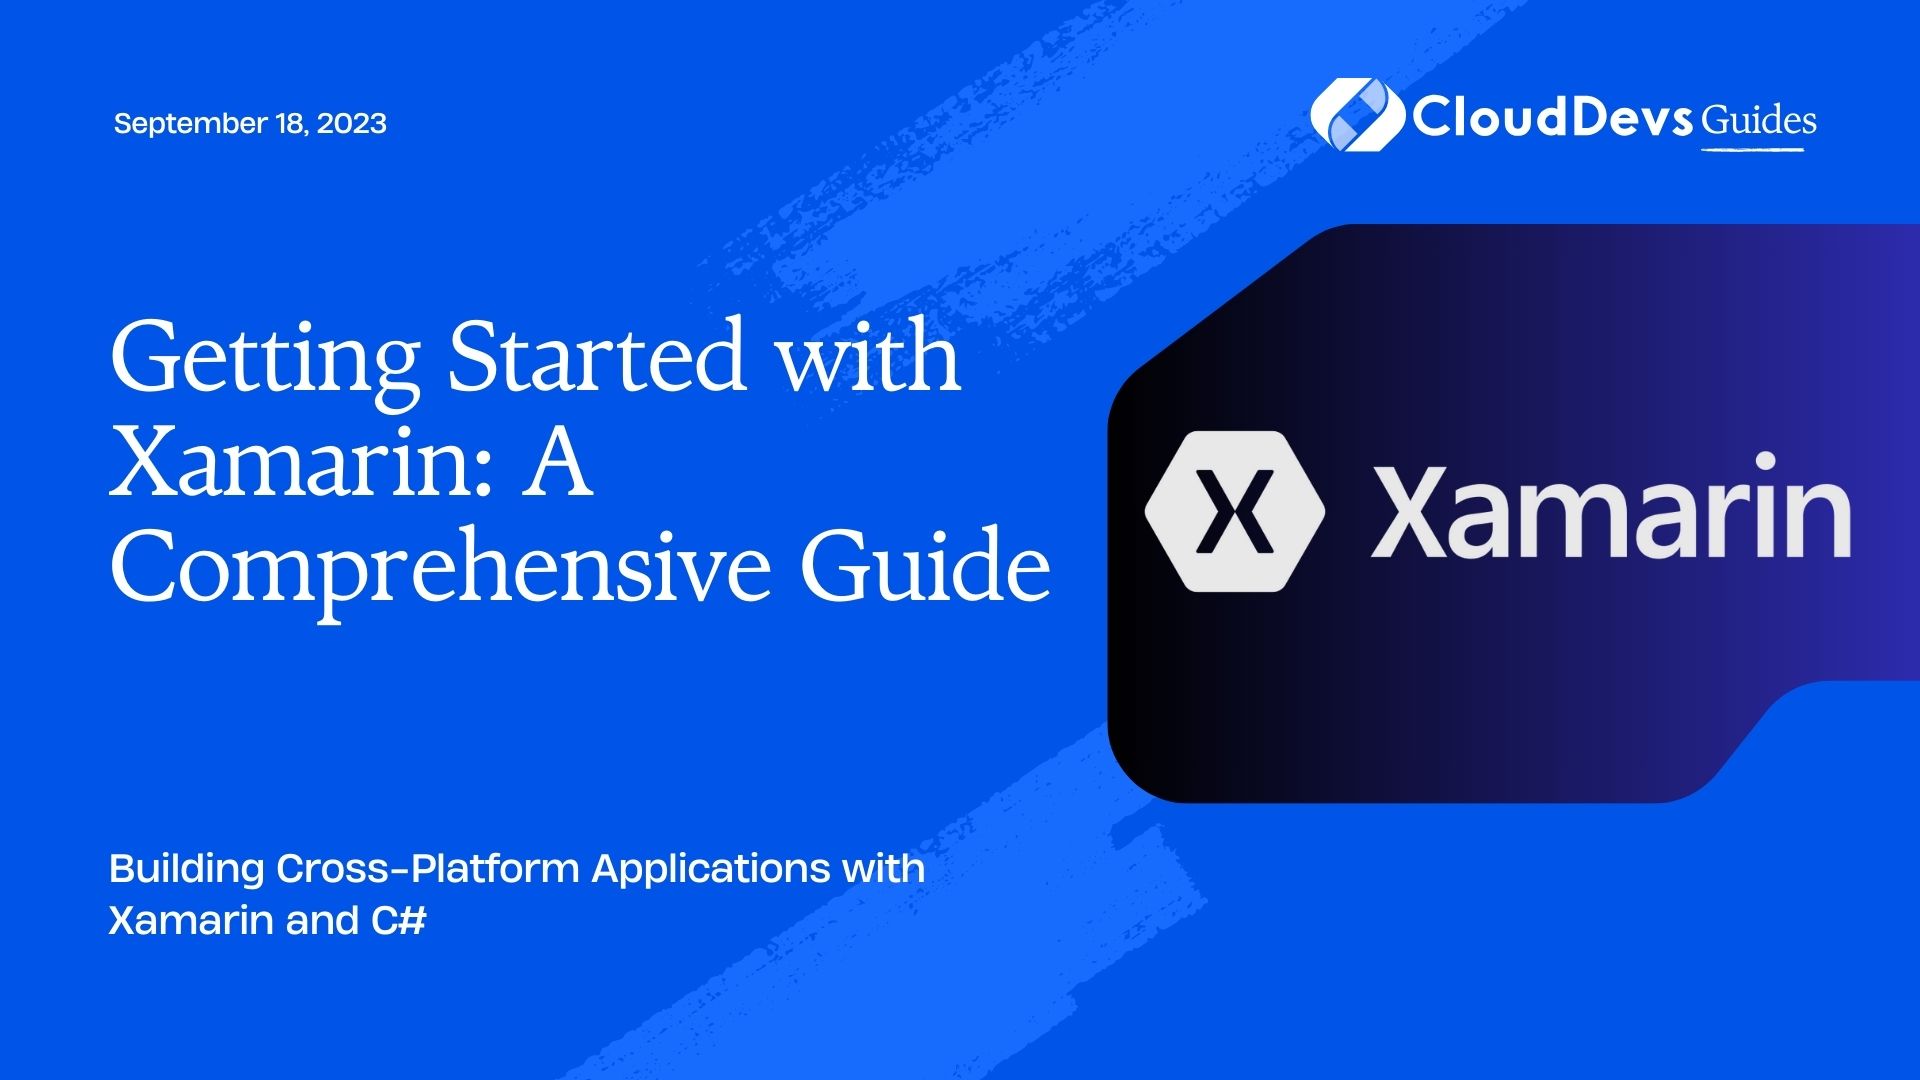 Getting Started with Xamarin: A Comprehensive Guide